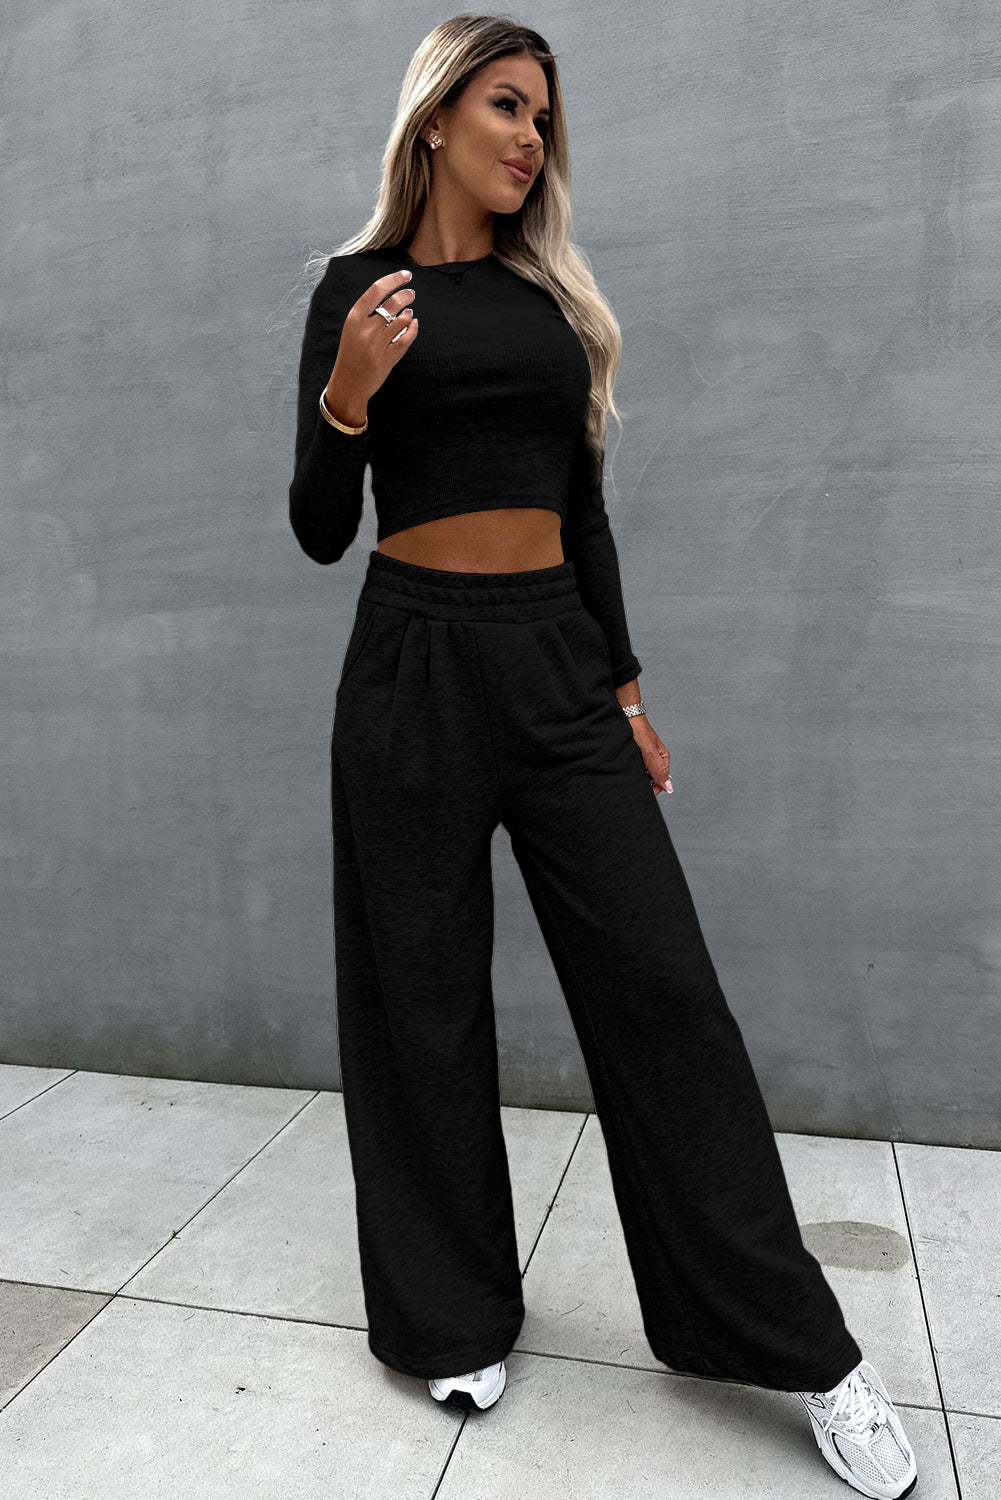 Black Crop Top and Wide Leg Pants Two Piece Set